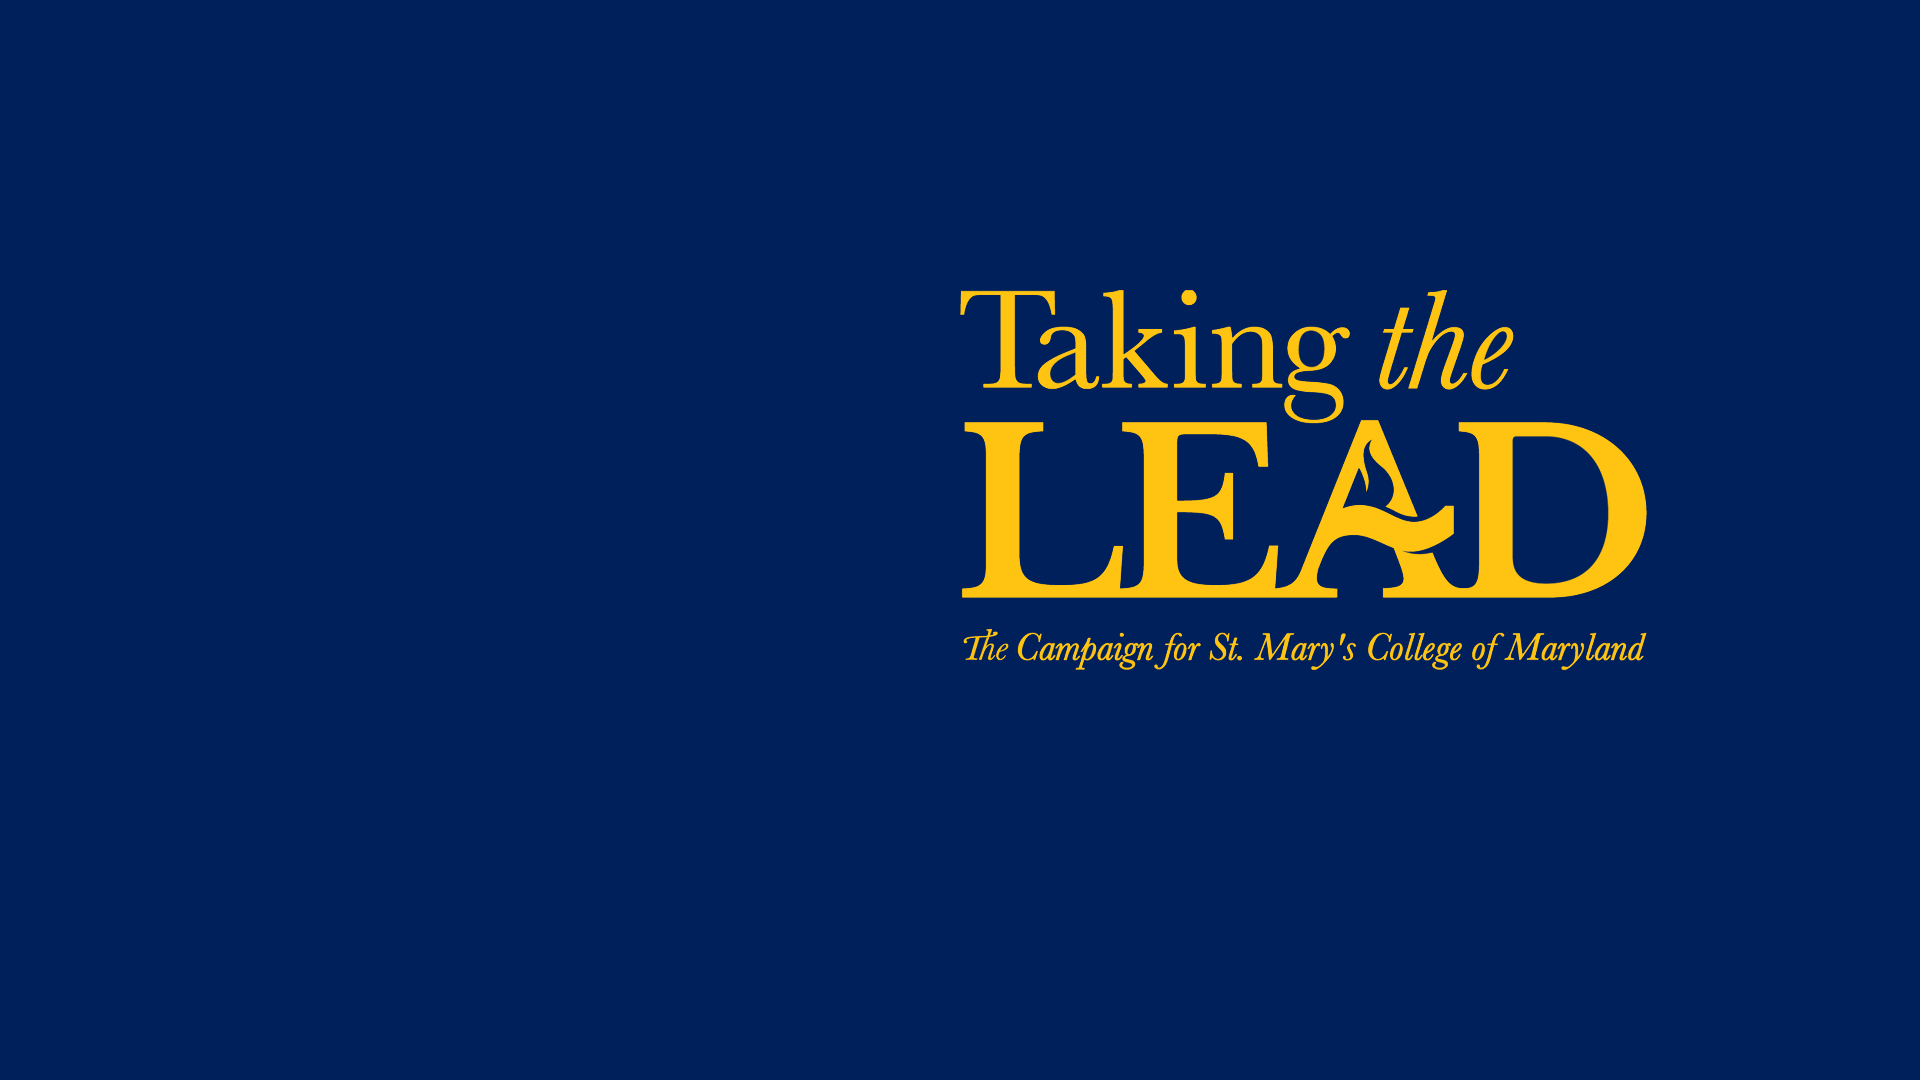 Lead Campaign logo on navy background